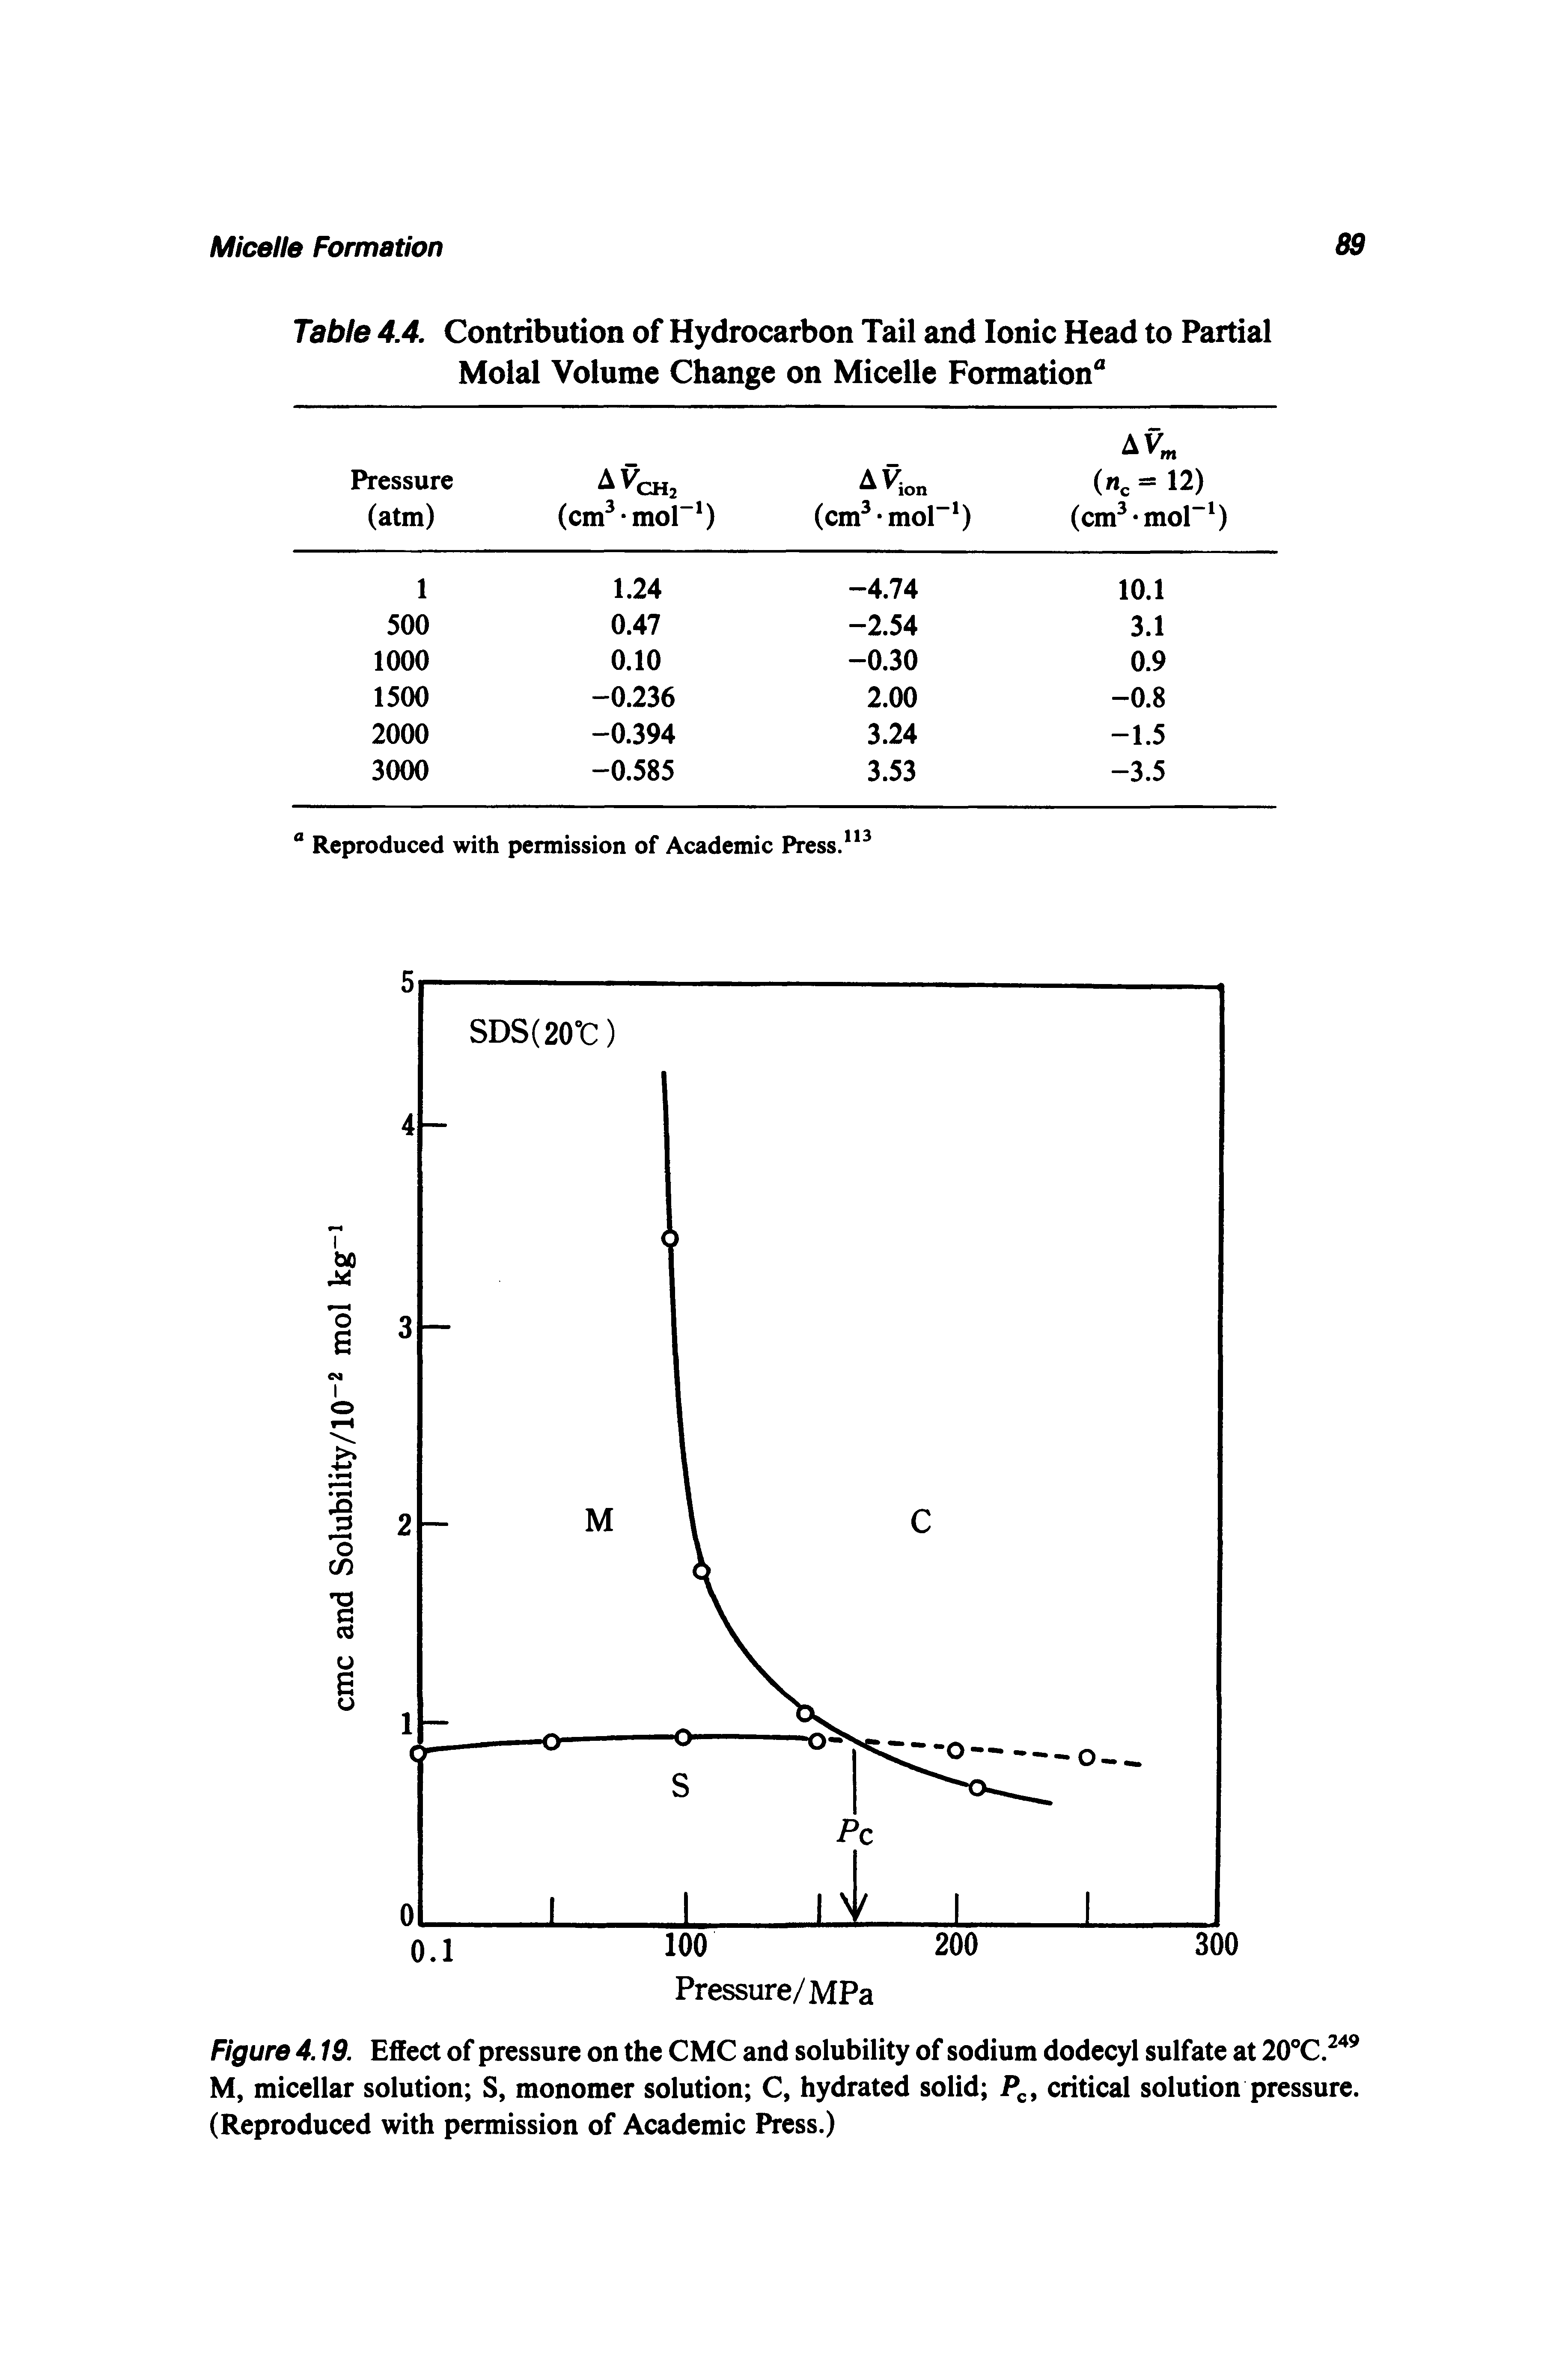 Figure 4.19. Effect of pressure on the CMC and solubility of sodium dodecyl sulfate at 20°C. M, micellar solution S, monomer solution C, hydrated solid critical solution pressure. (Reproduced with permission of Academic Press.)...